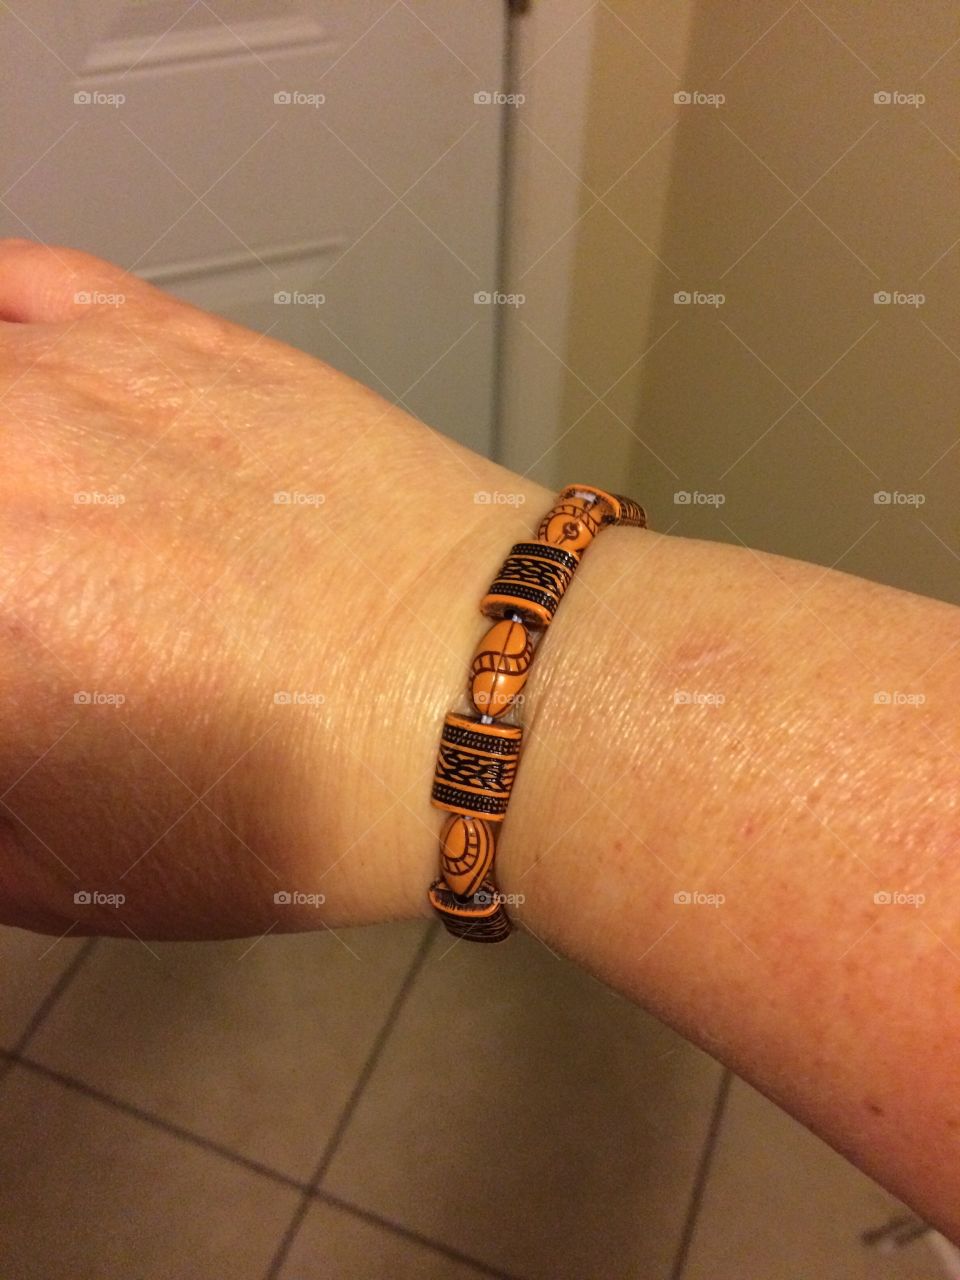 My homemade bracelet with brown beads.
